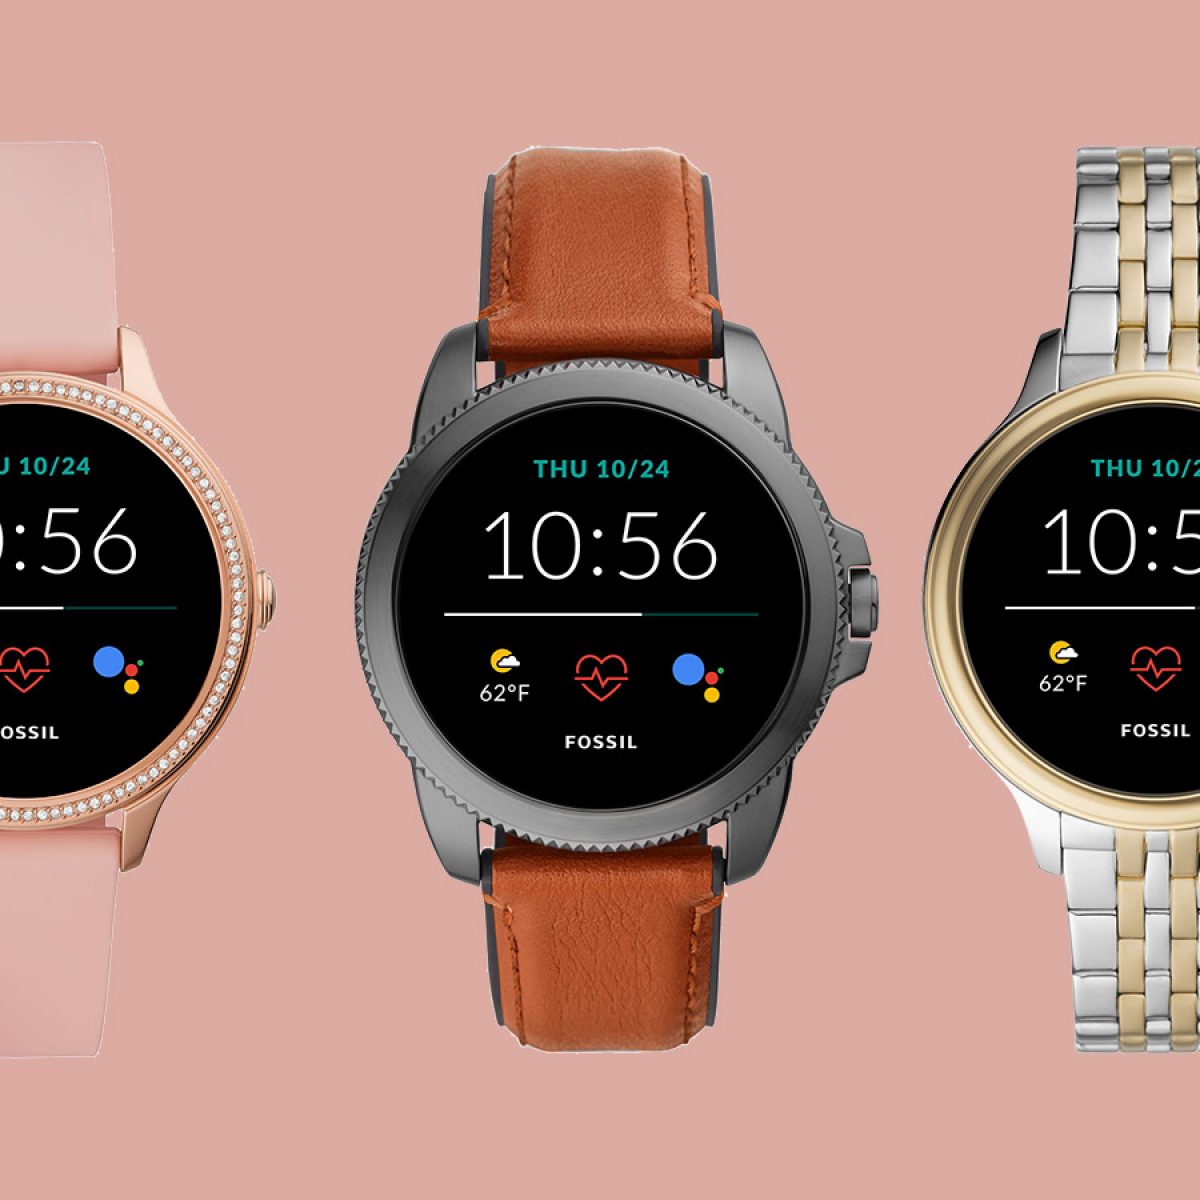 New Fossil Smartwatch Isn't the One We Wanted